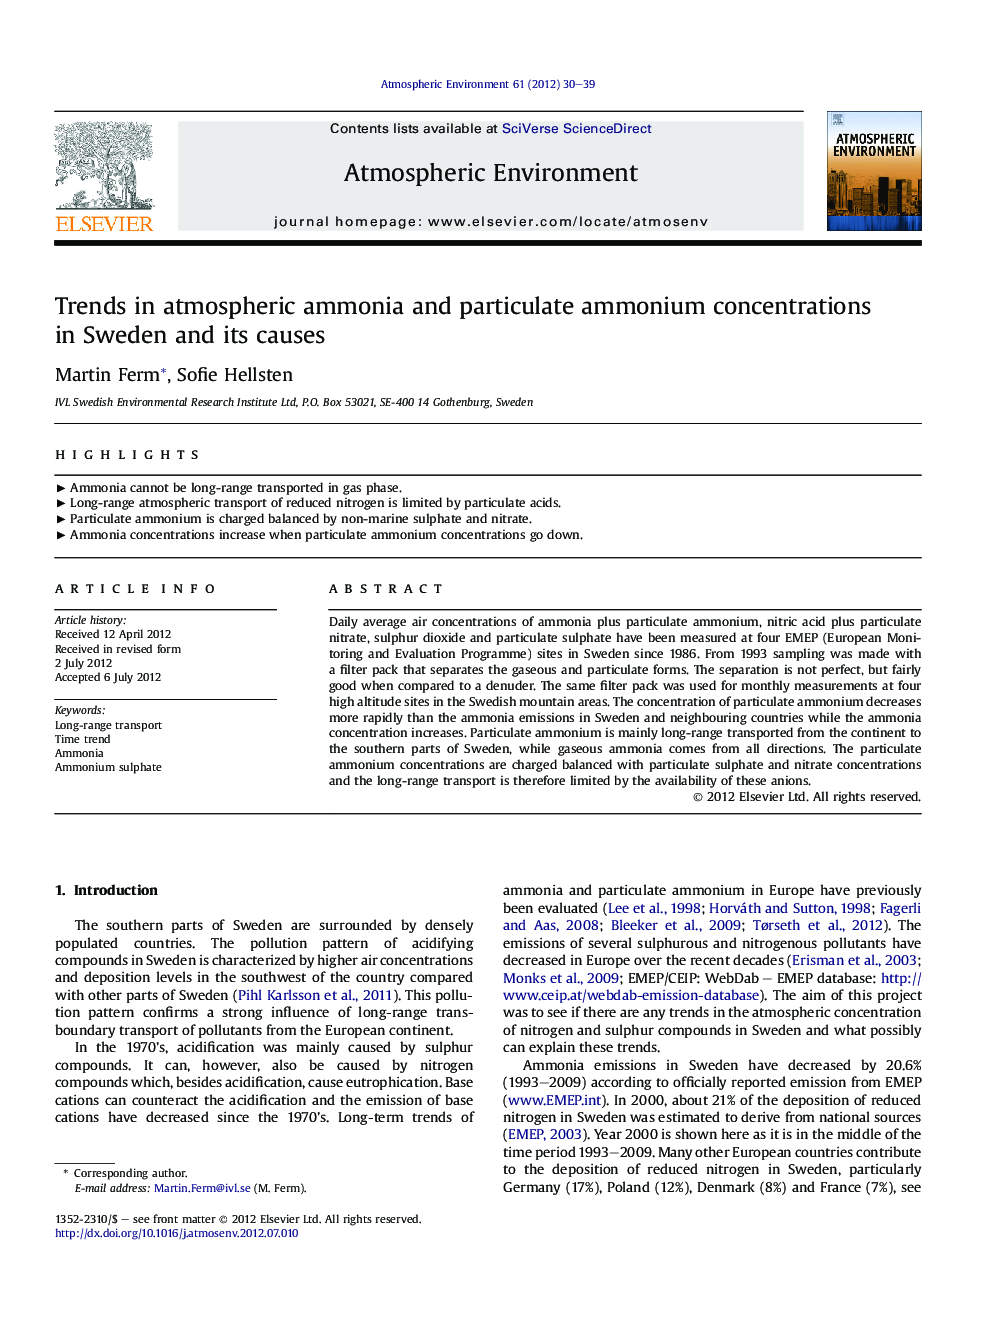 Trends in atmospheric ammonia and particulate ammonium concentrations in Sweden and its causes